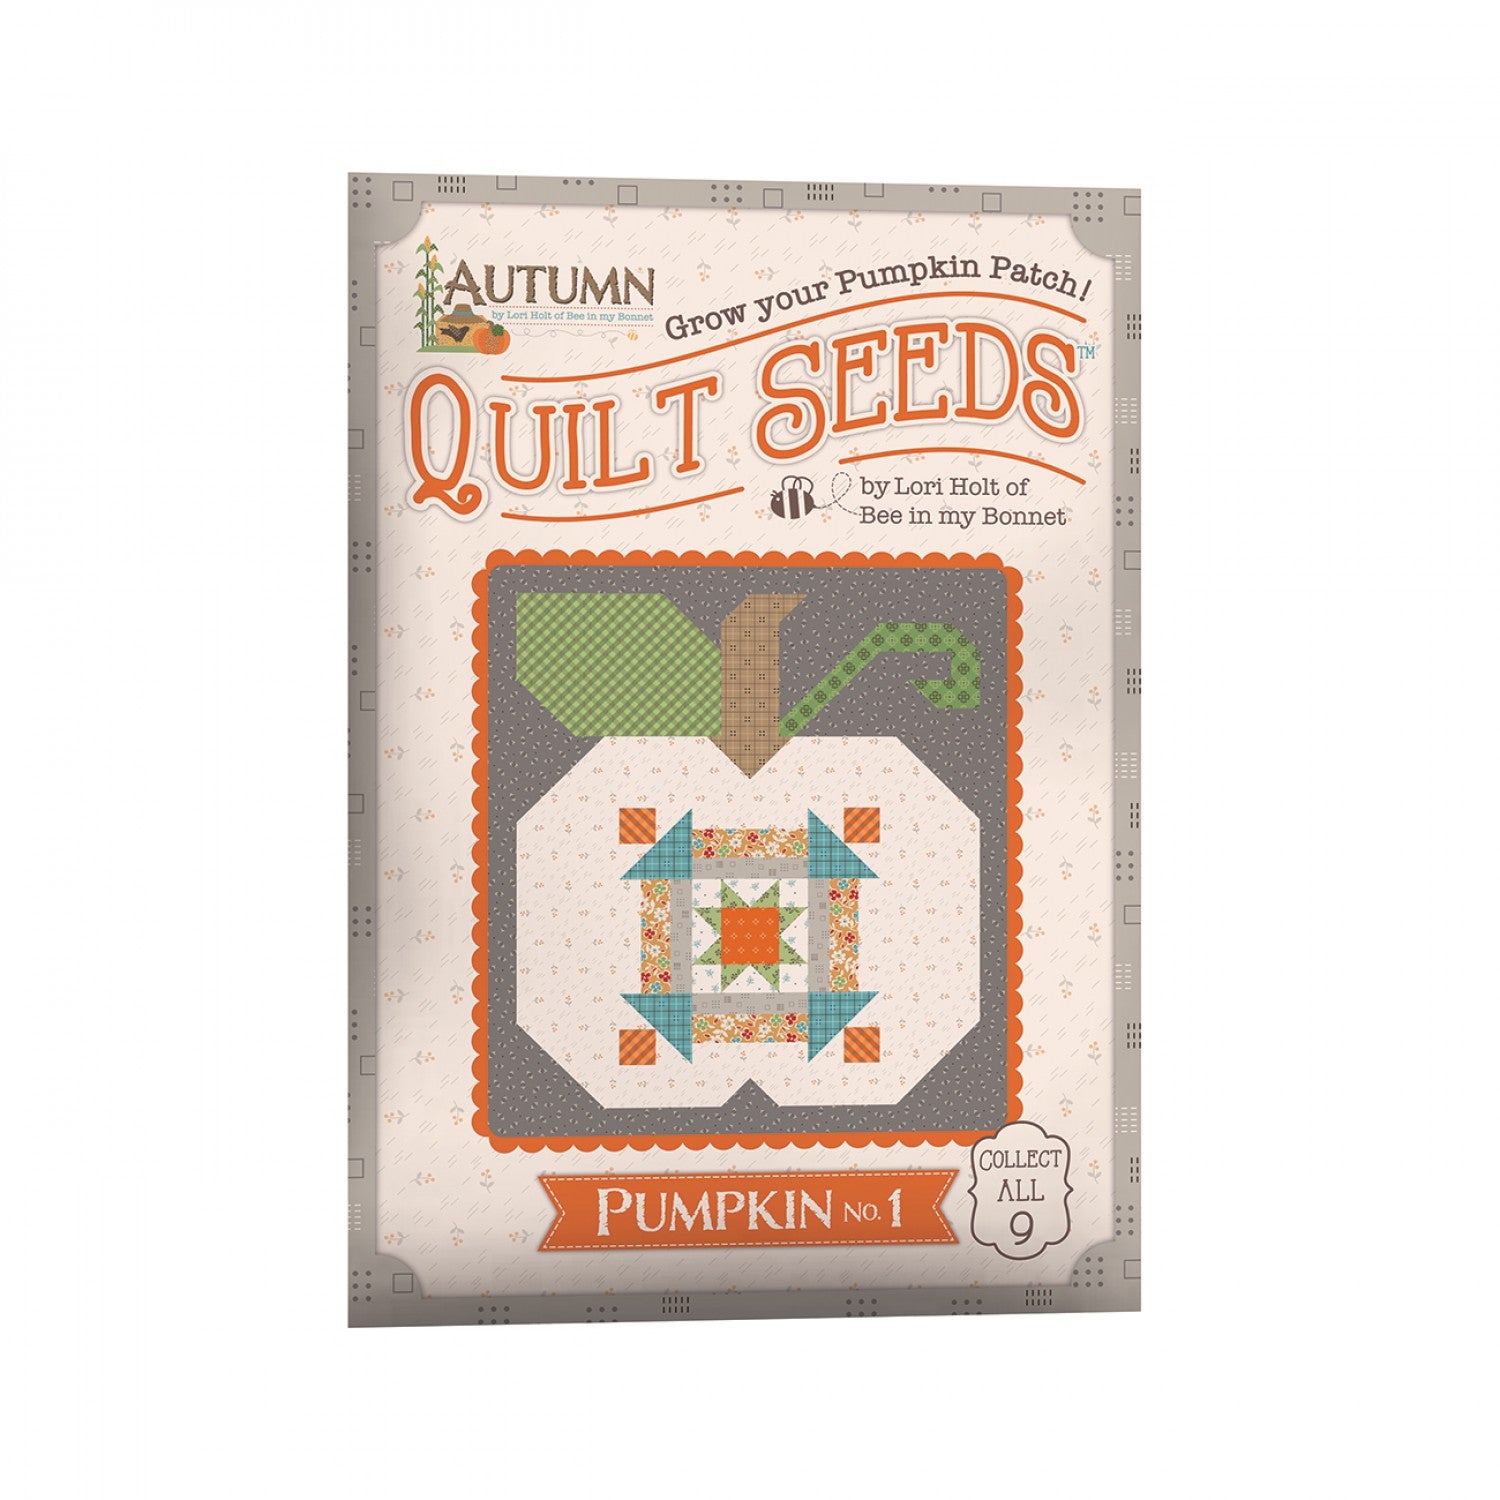 Autumn | Quilt Seeds Pattern #1 by Lori Holt for RIley Blake